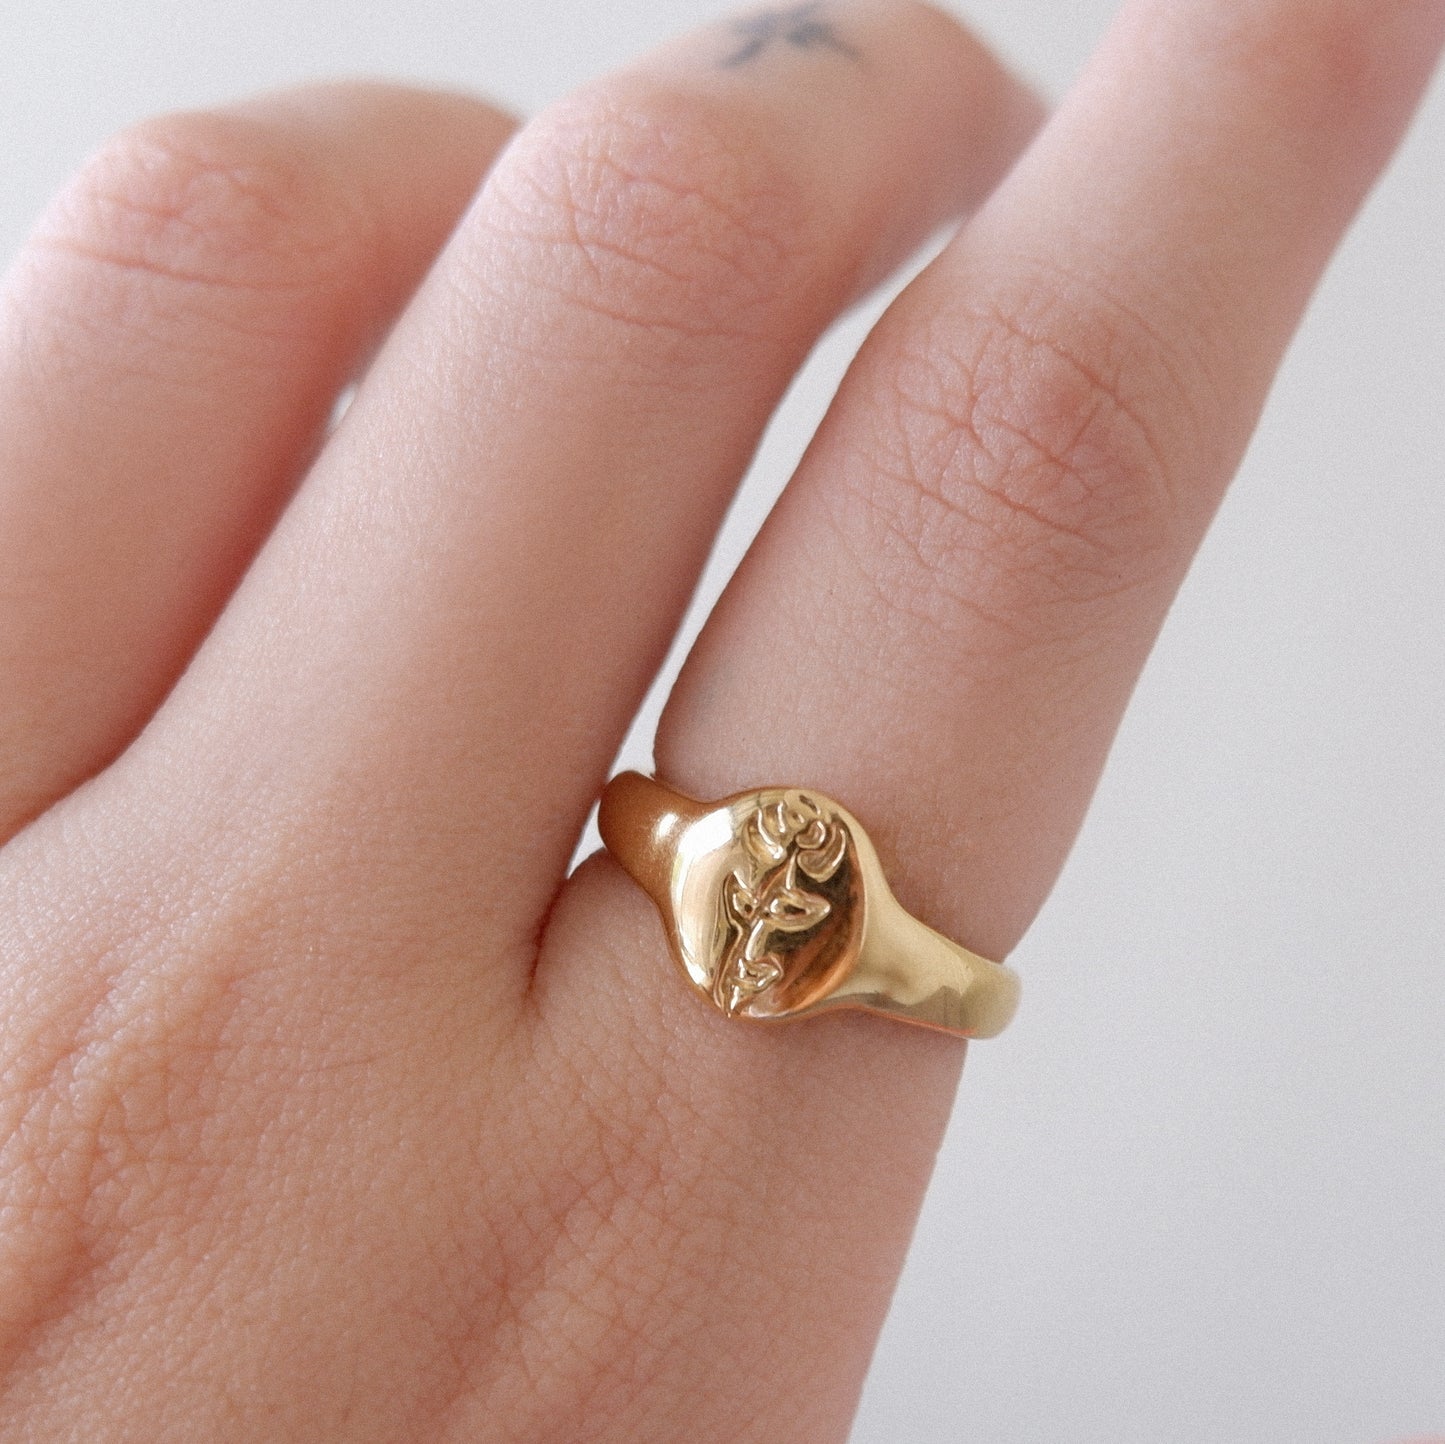 The Rose Signet Ring